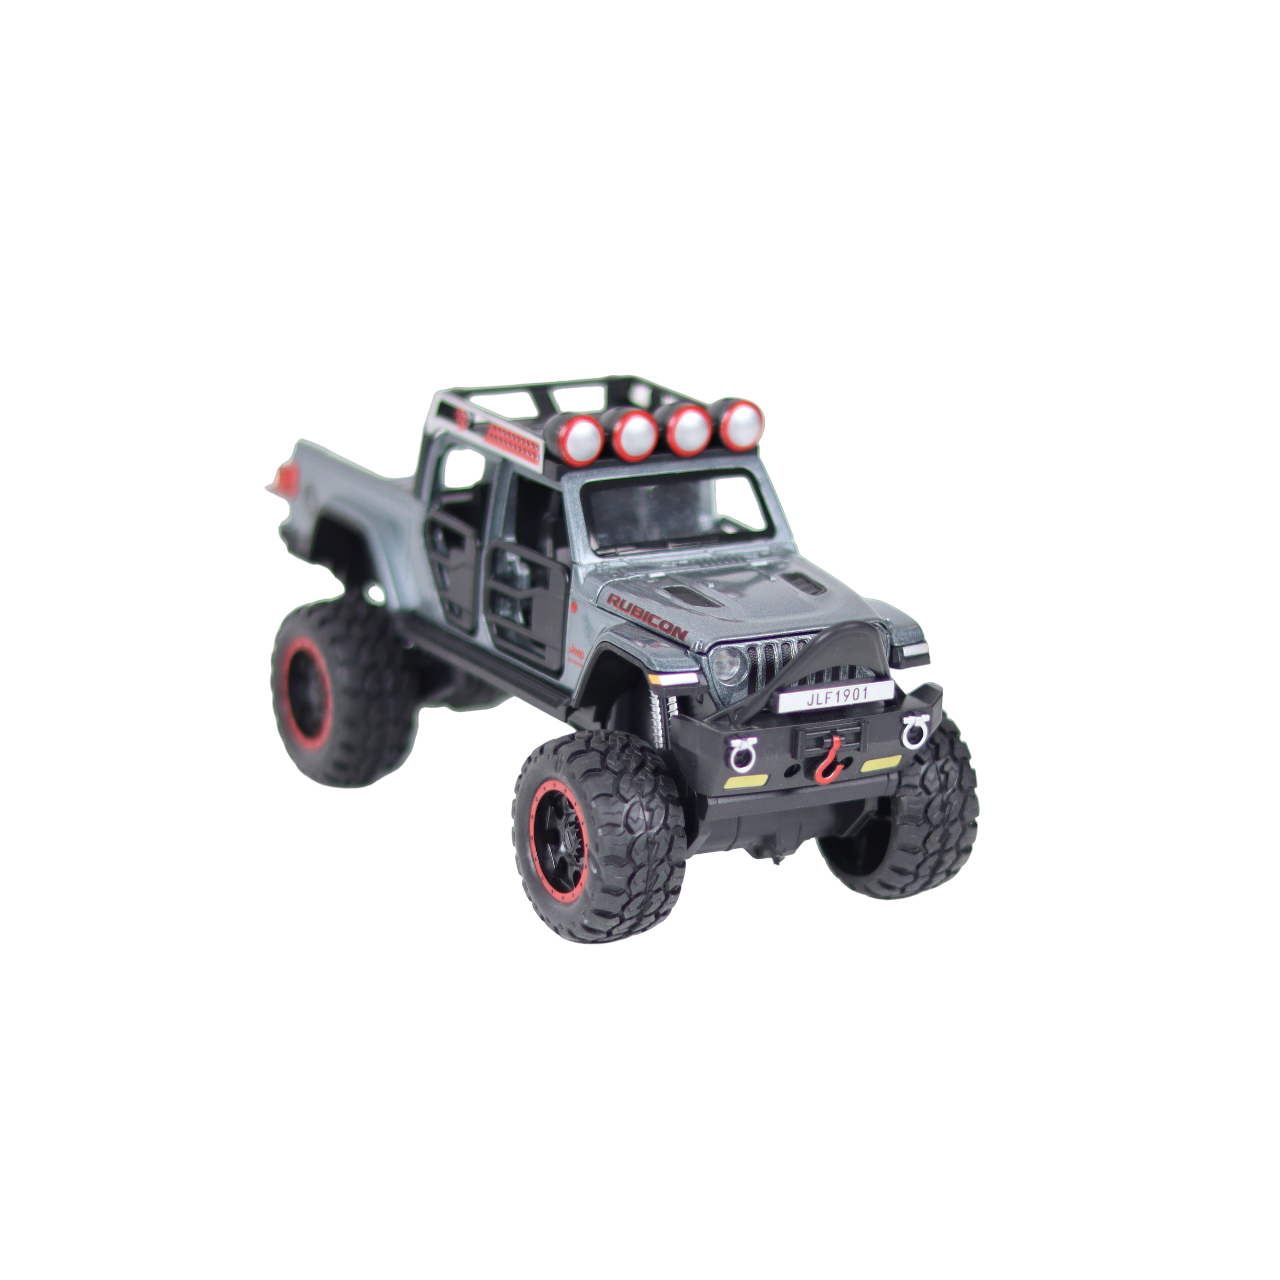 Jeep Wrangler Rubicon 1:26 Scale Die cast Metal Pullback Toy car with Openable Doors & Light(Grey)